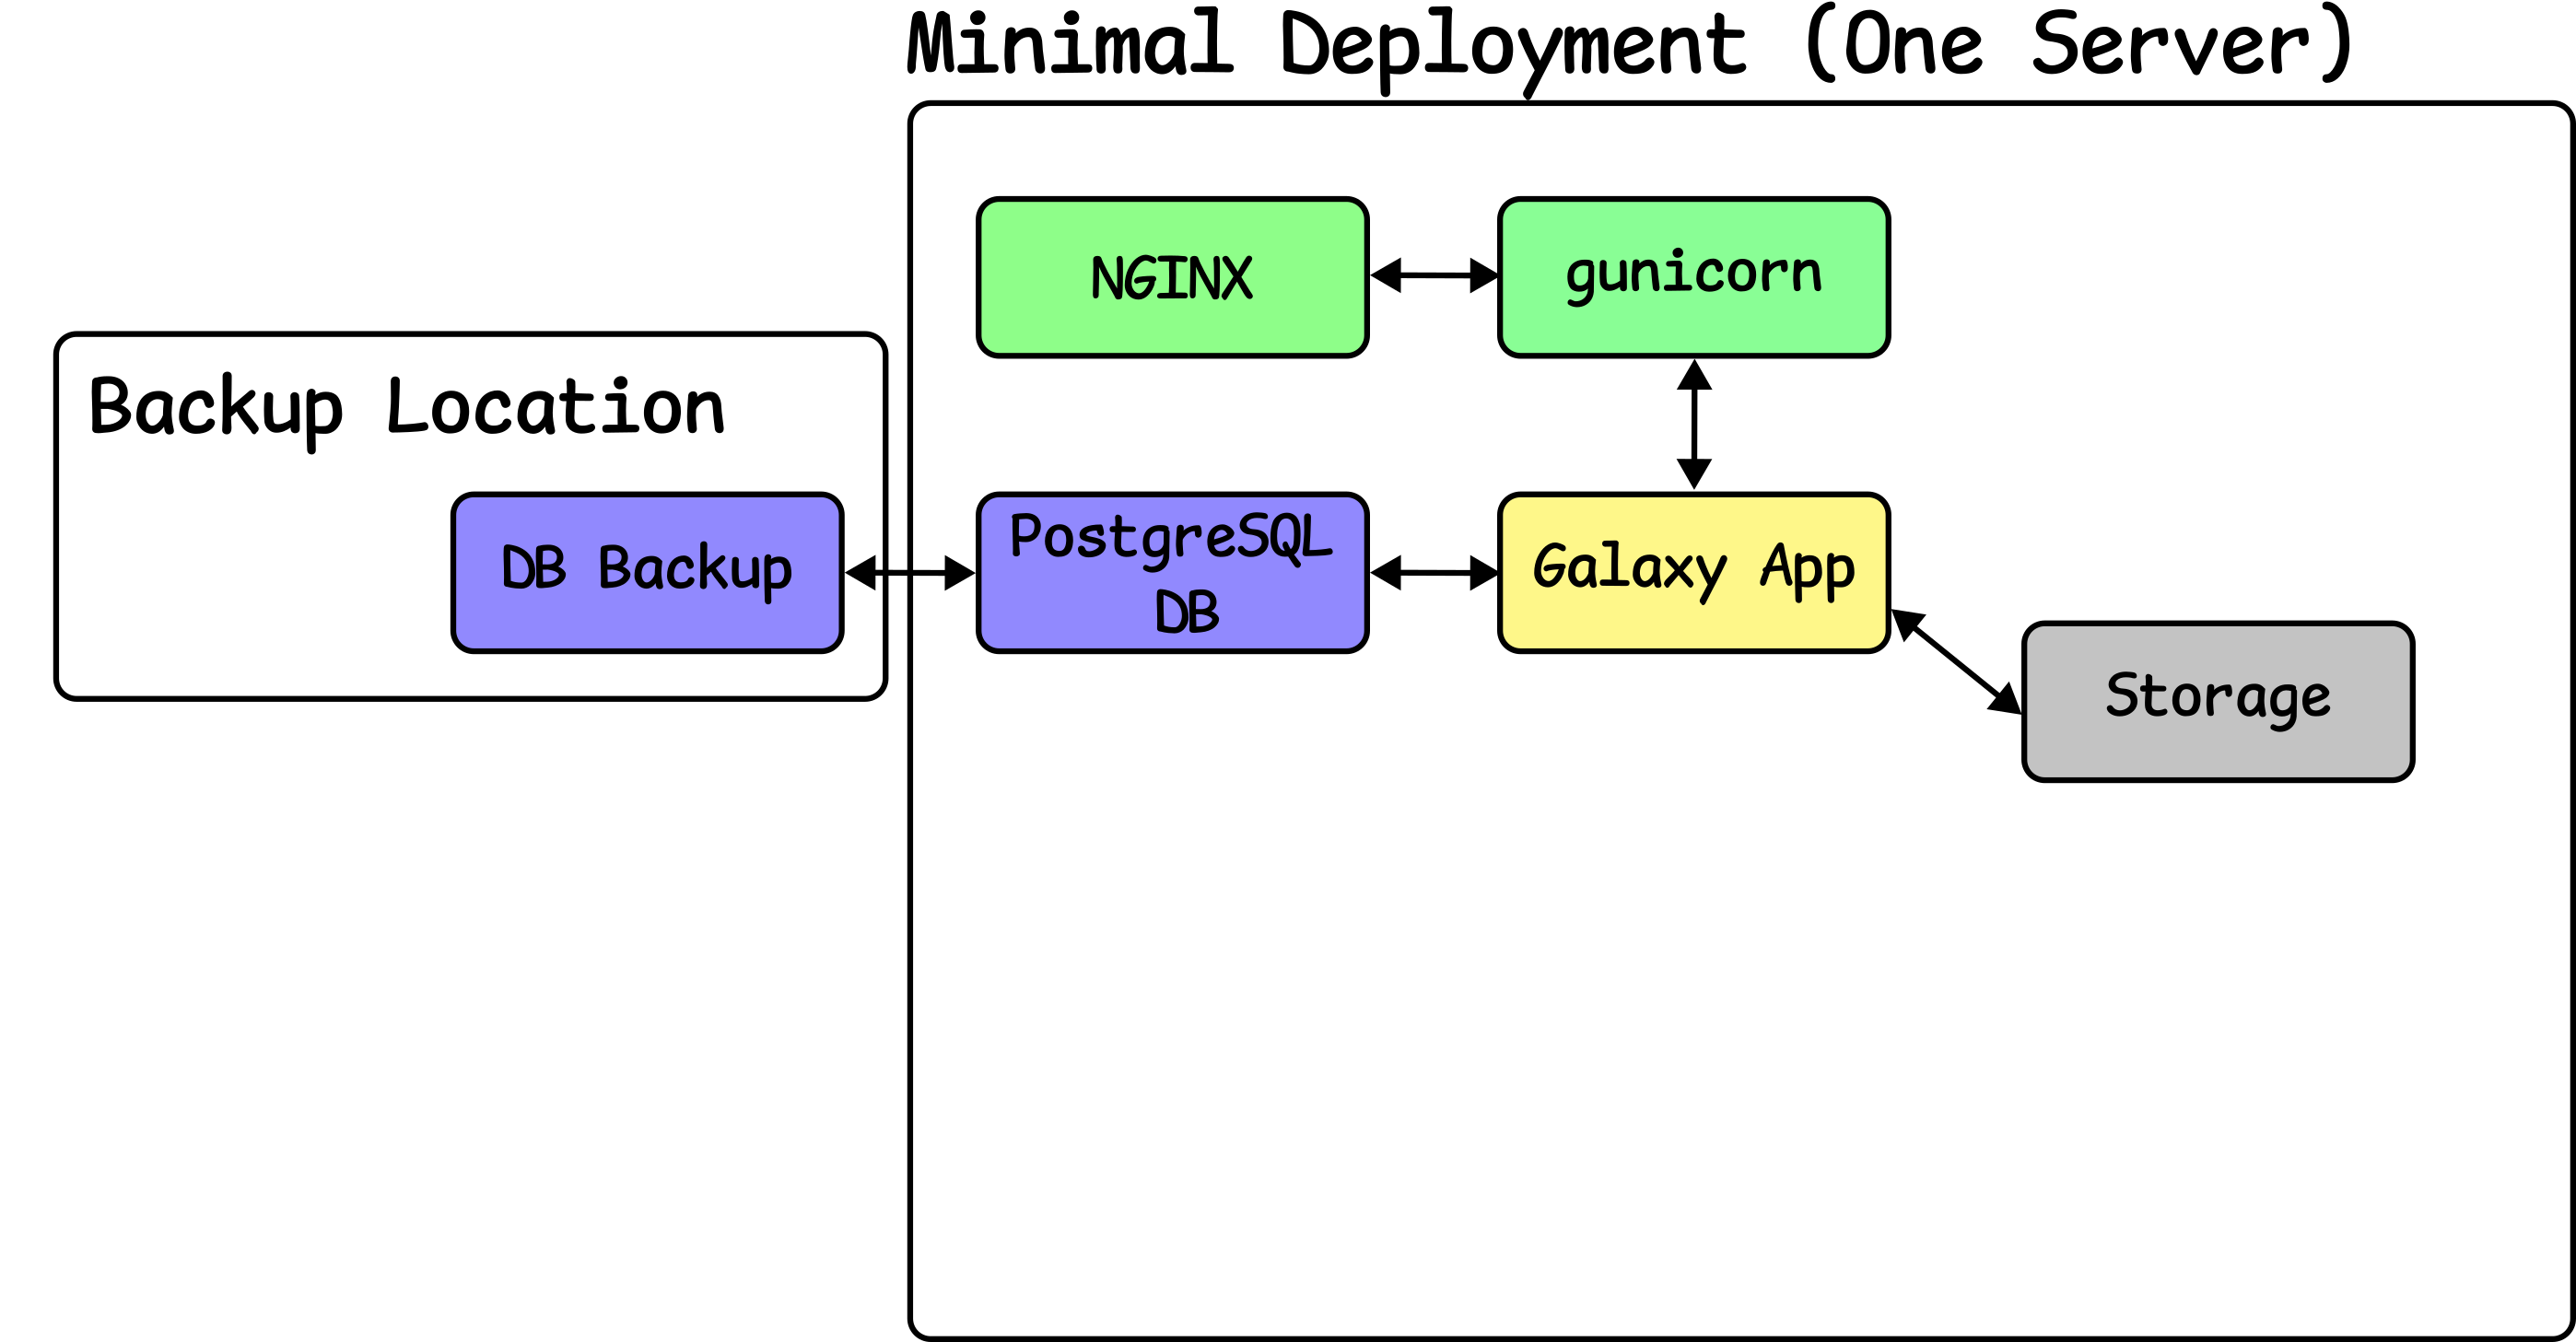 A backup location area is added, with a node DB backup inside connected to the PostgreSQL db